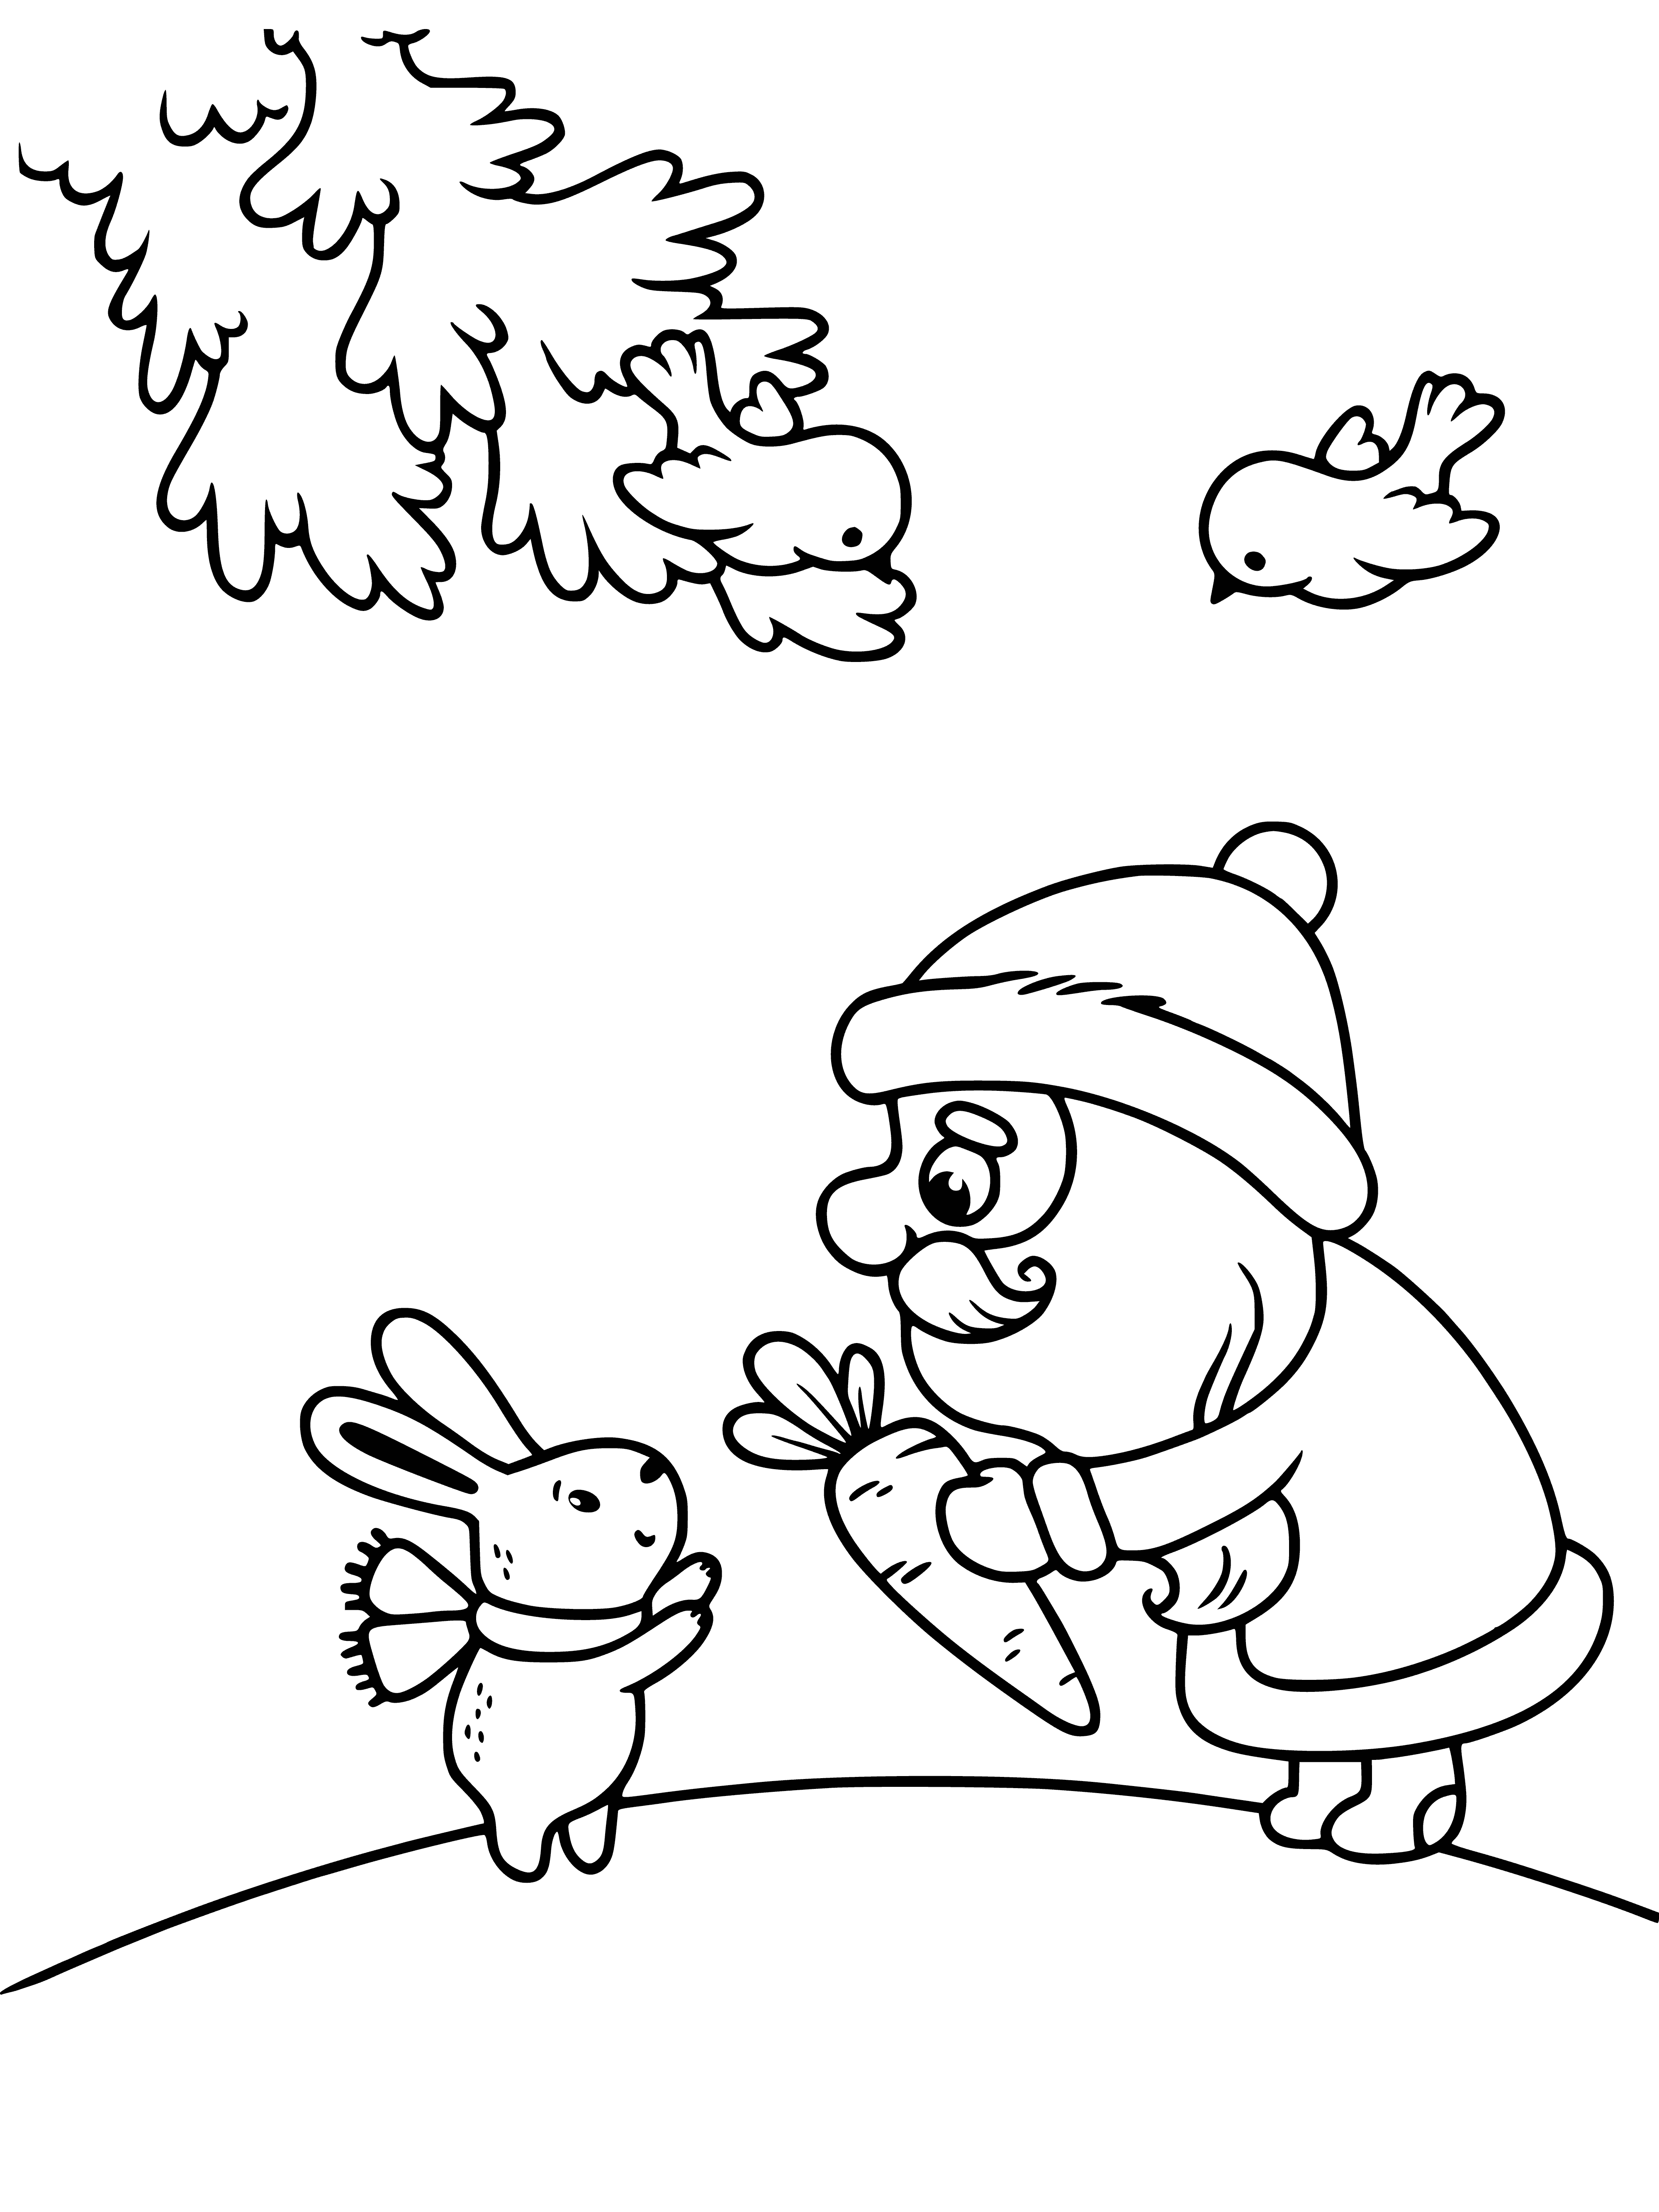 coloring page: Santa Claus stands in front of a Christmas tree, wearing a red suit & hat with white fur trim, a white beard & a large red sack of presents.